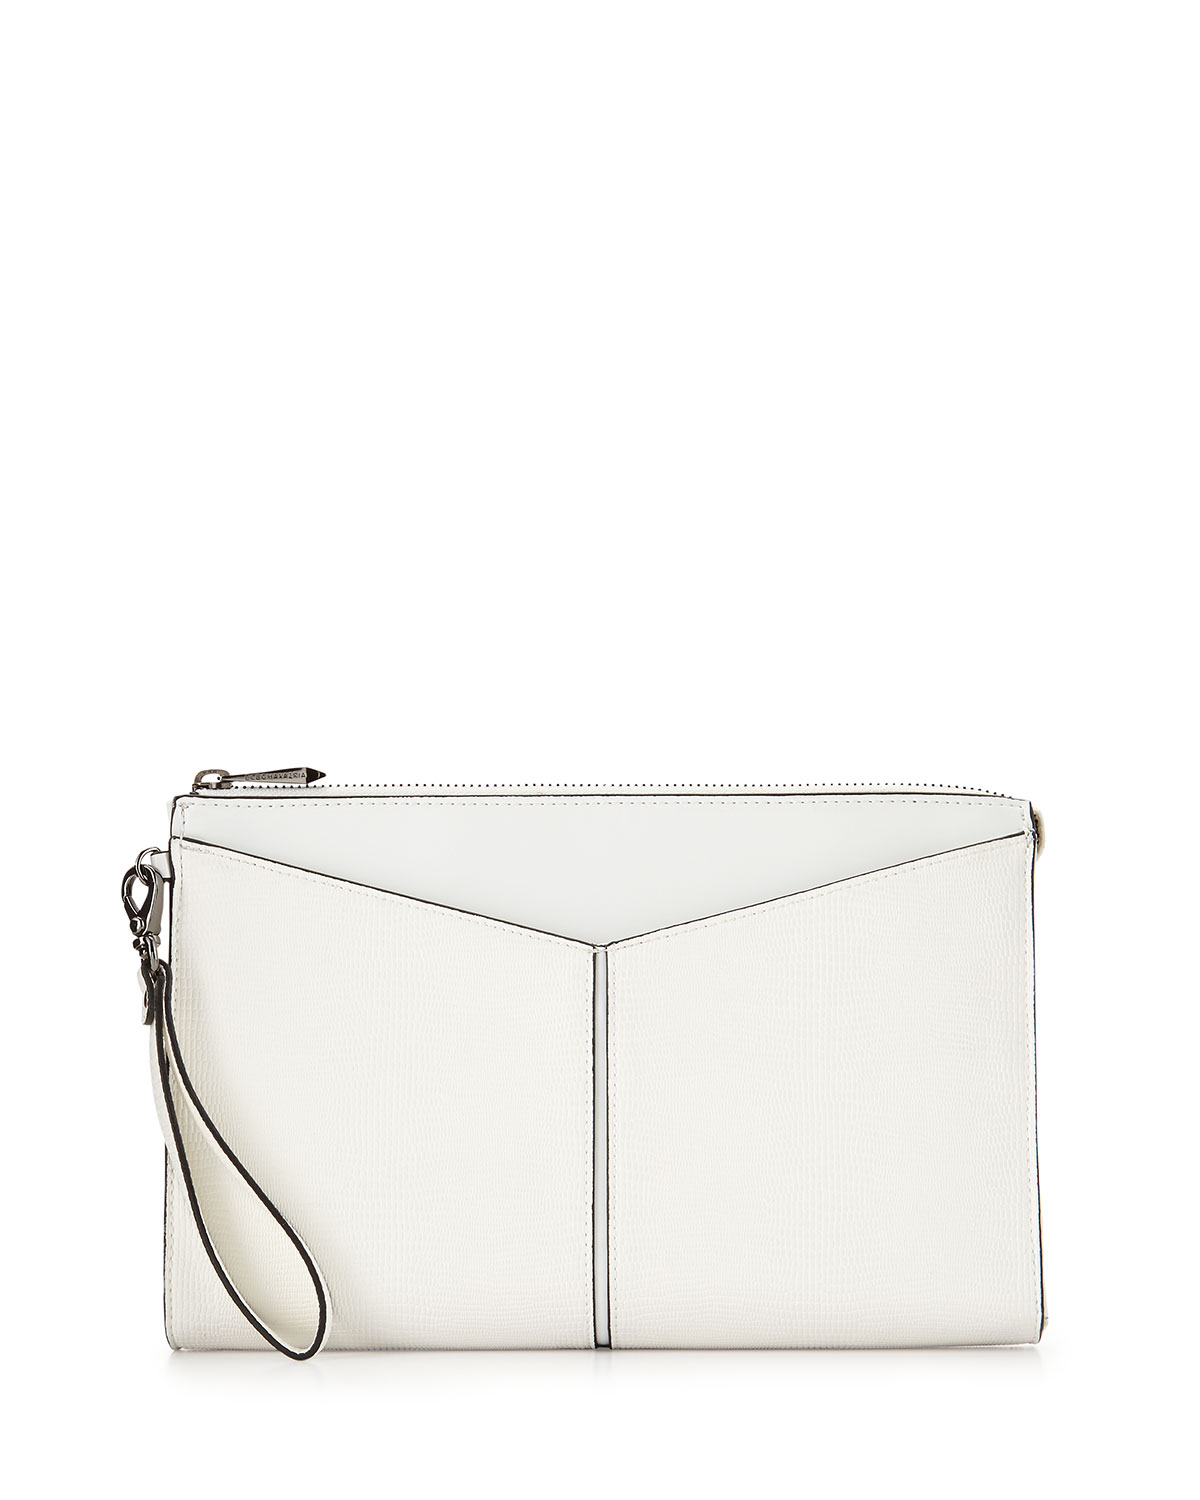 Bcbgmaxazria Angled Snake-Print Faux-Leather Clutch Bag in White (WHT) | Lyst